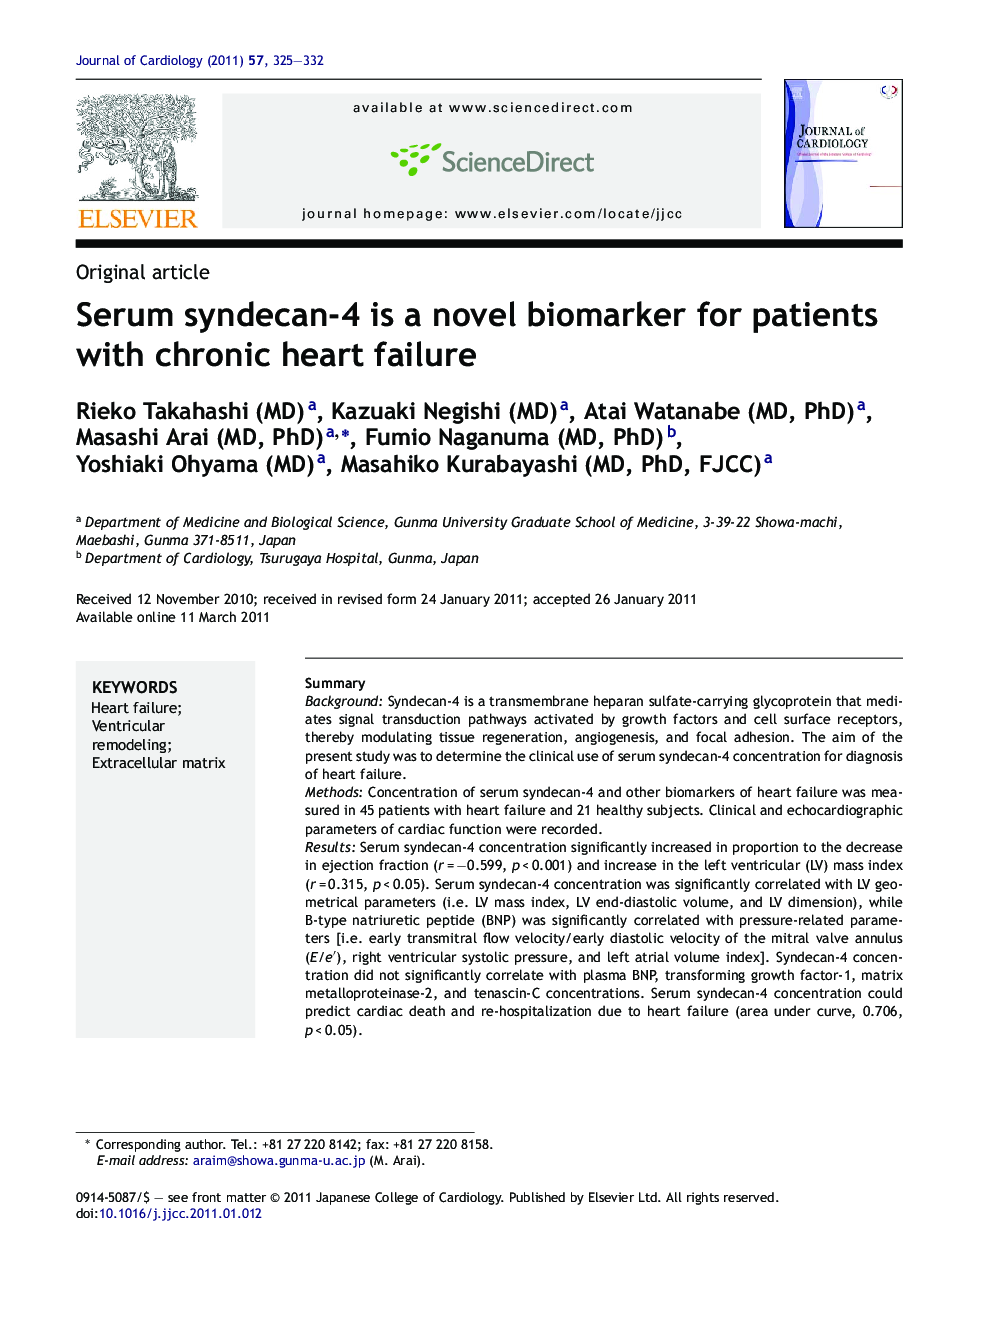 Serum syndecan-4 is a novel biomarker for patients with chronic heart failure